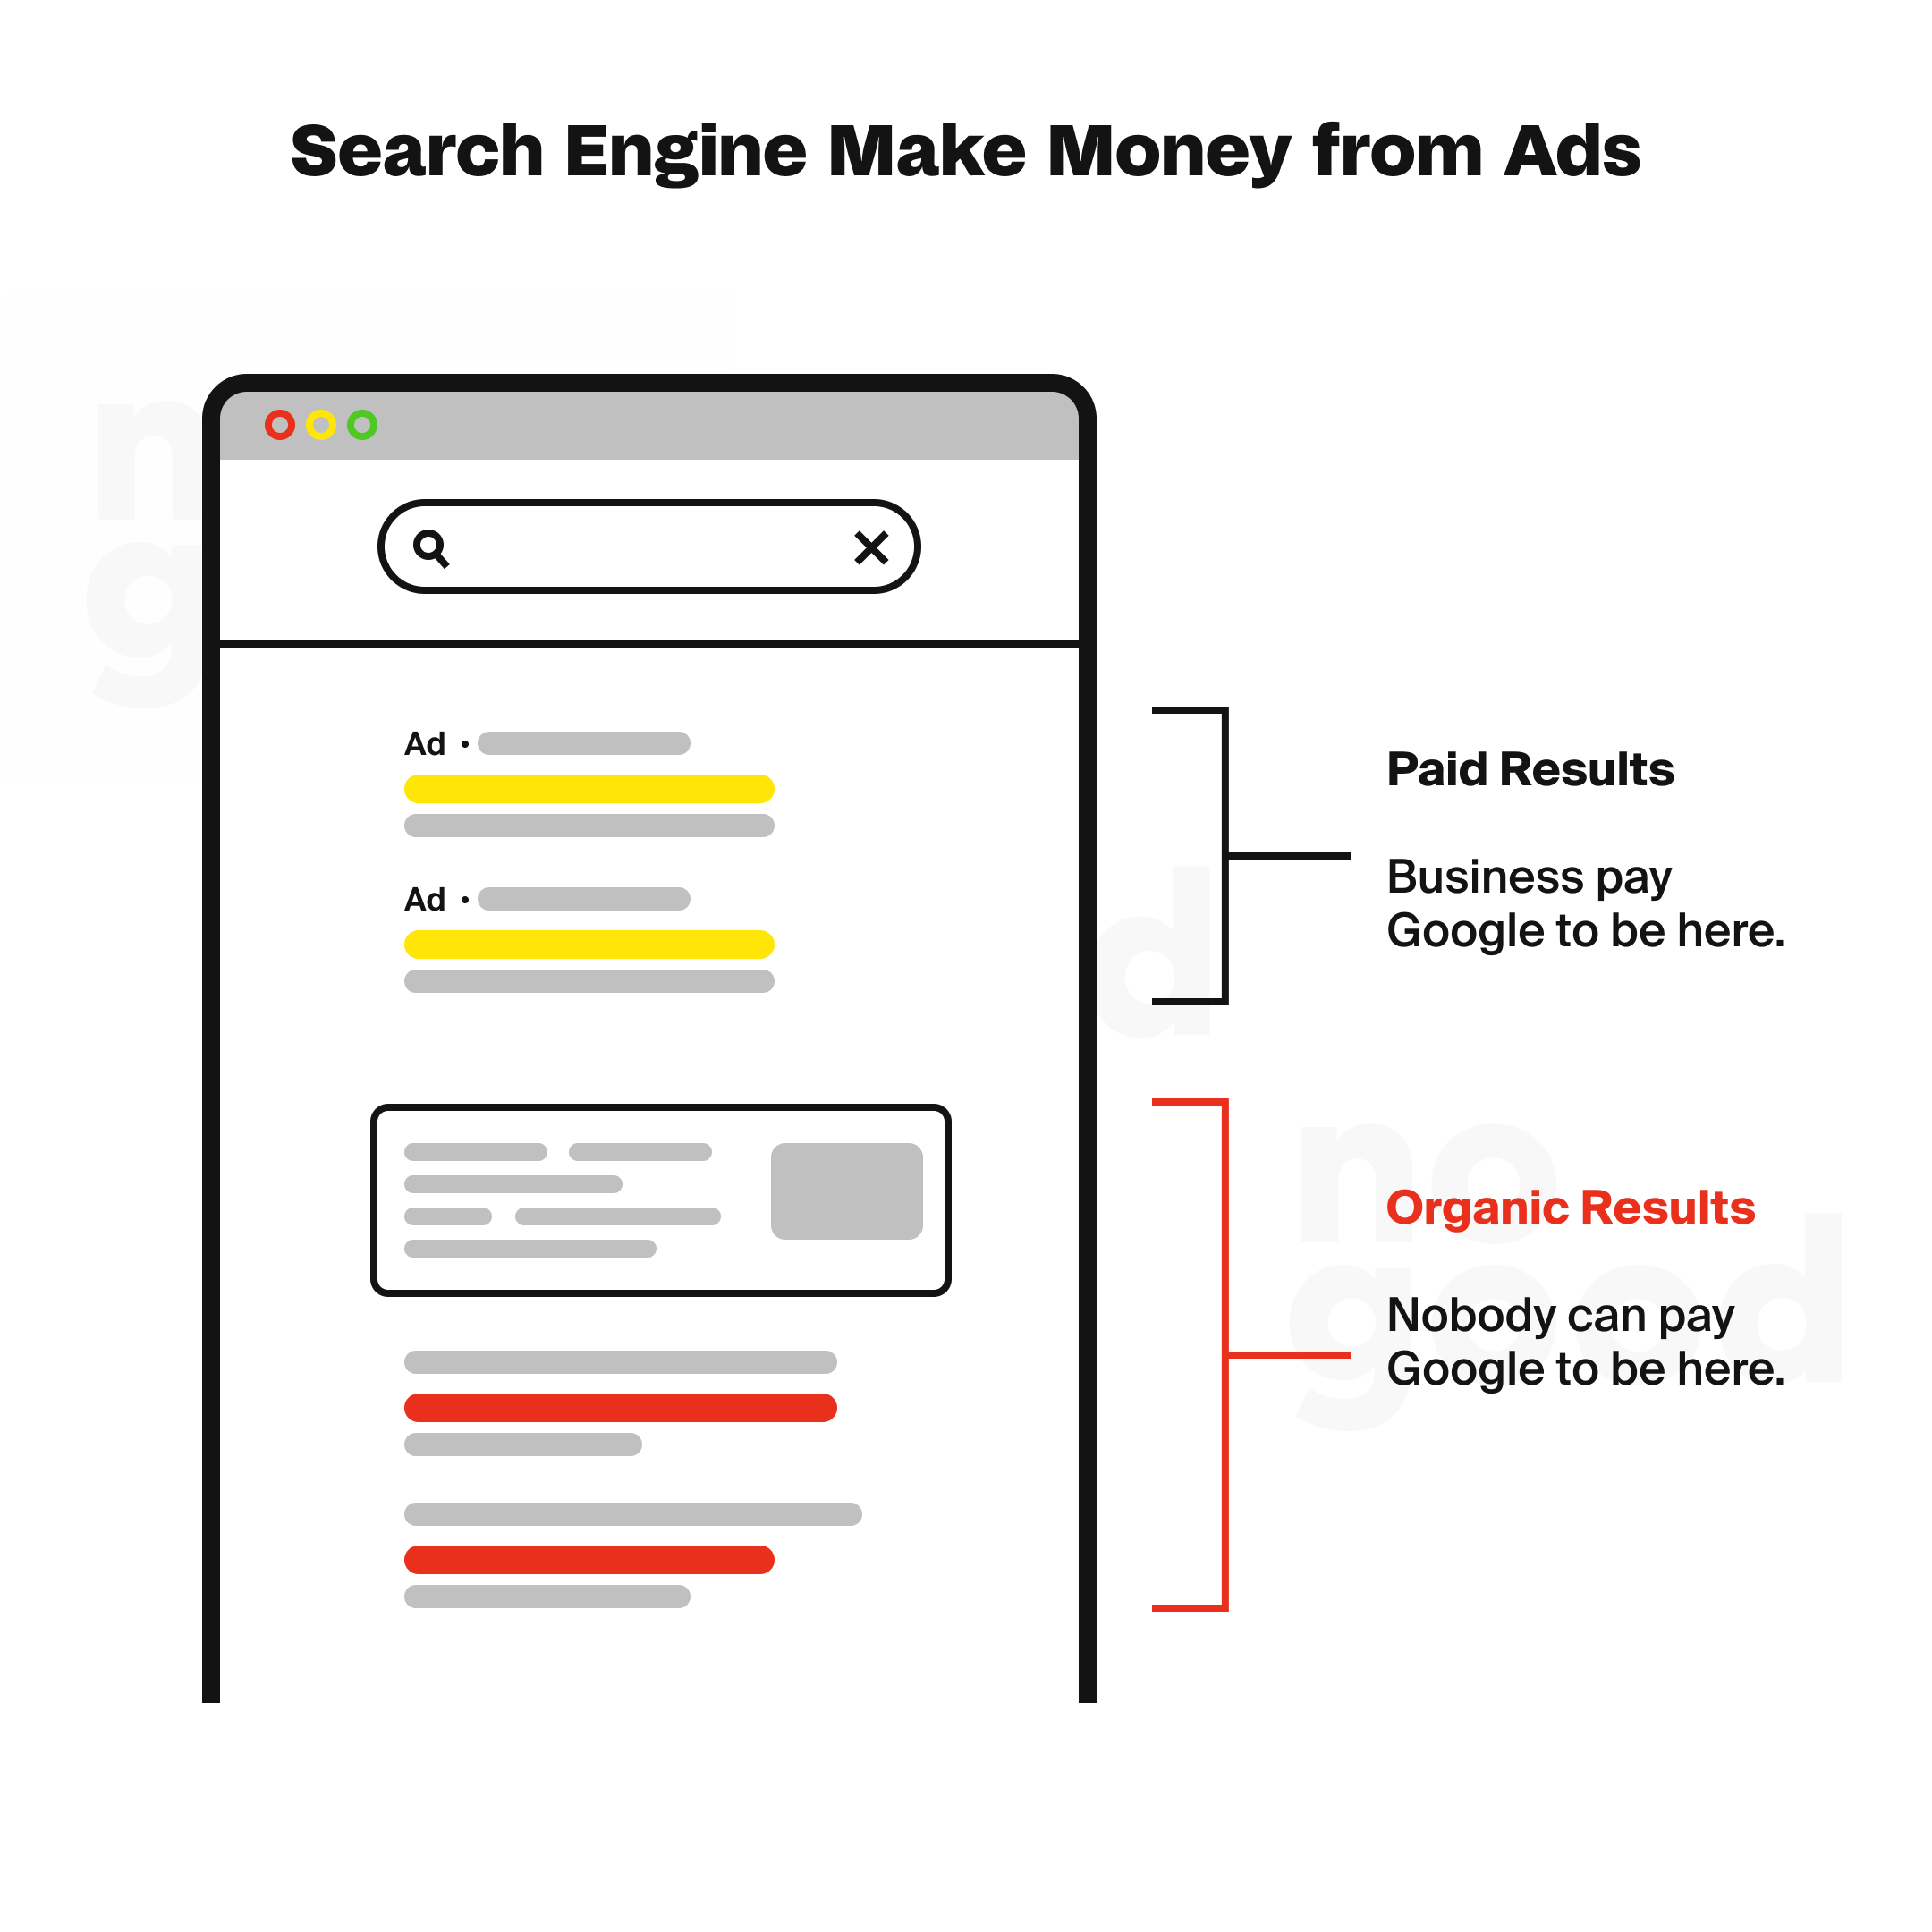 How search engines make money from ads